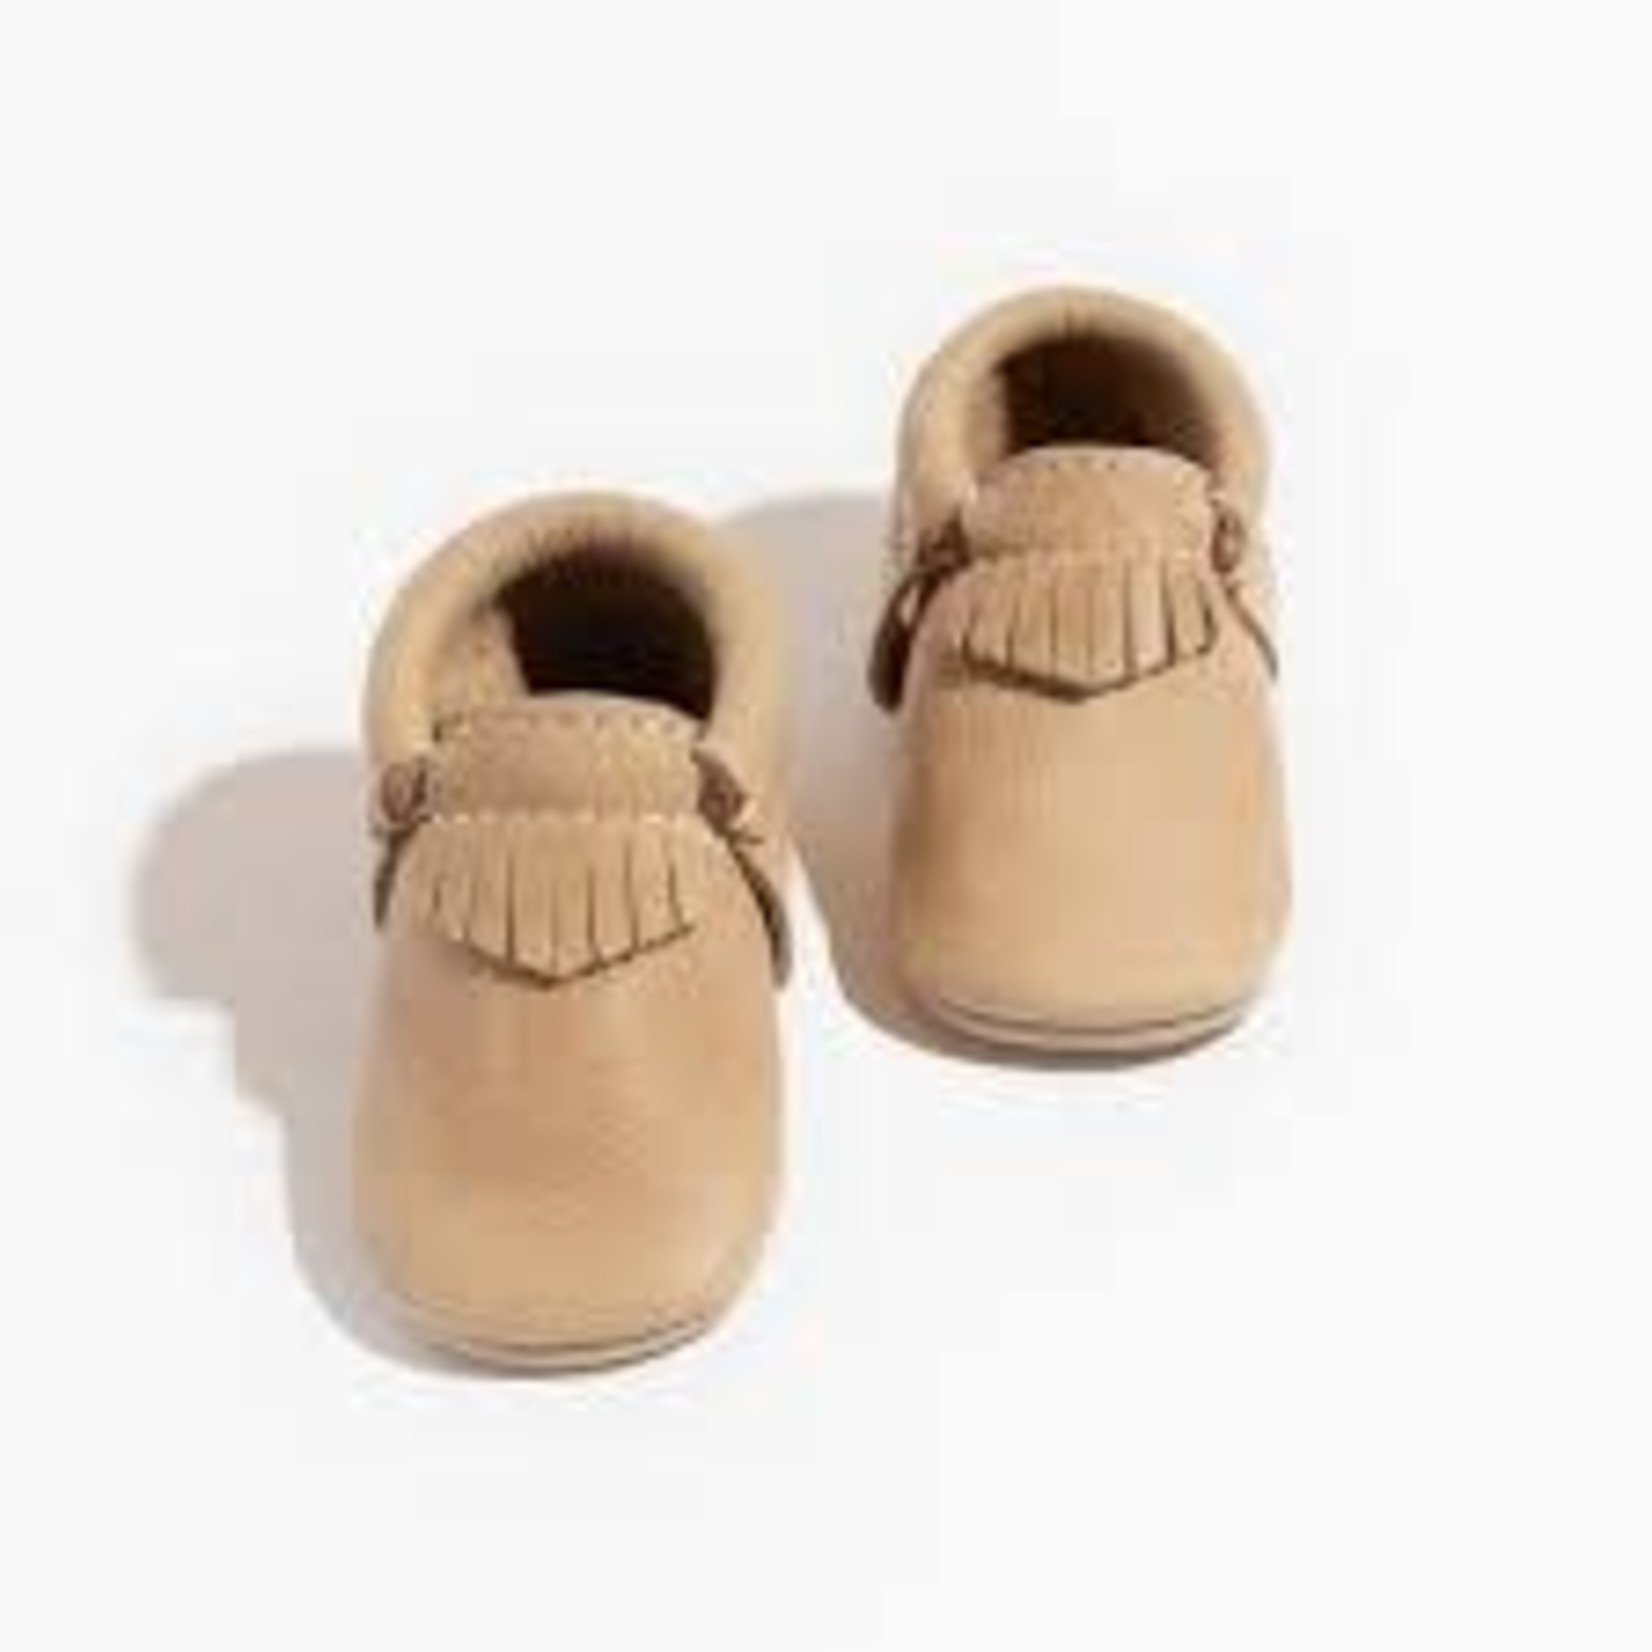 Freshly Picked Freshly Picked Weathered Brown City Moccasin Baby Boy, (1)6wk06m)